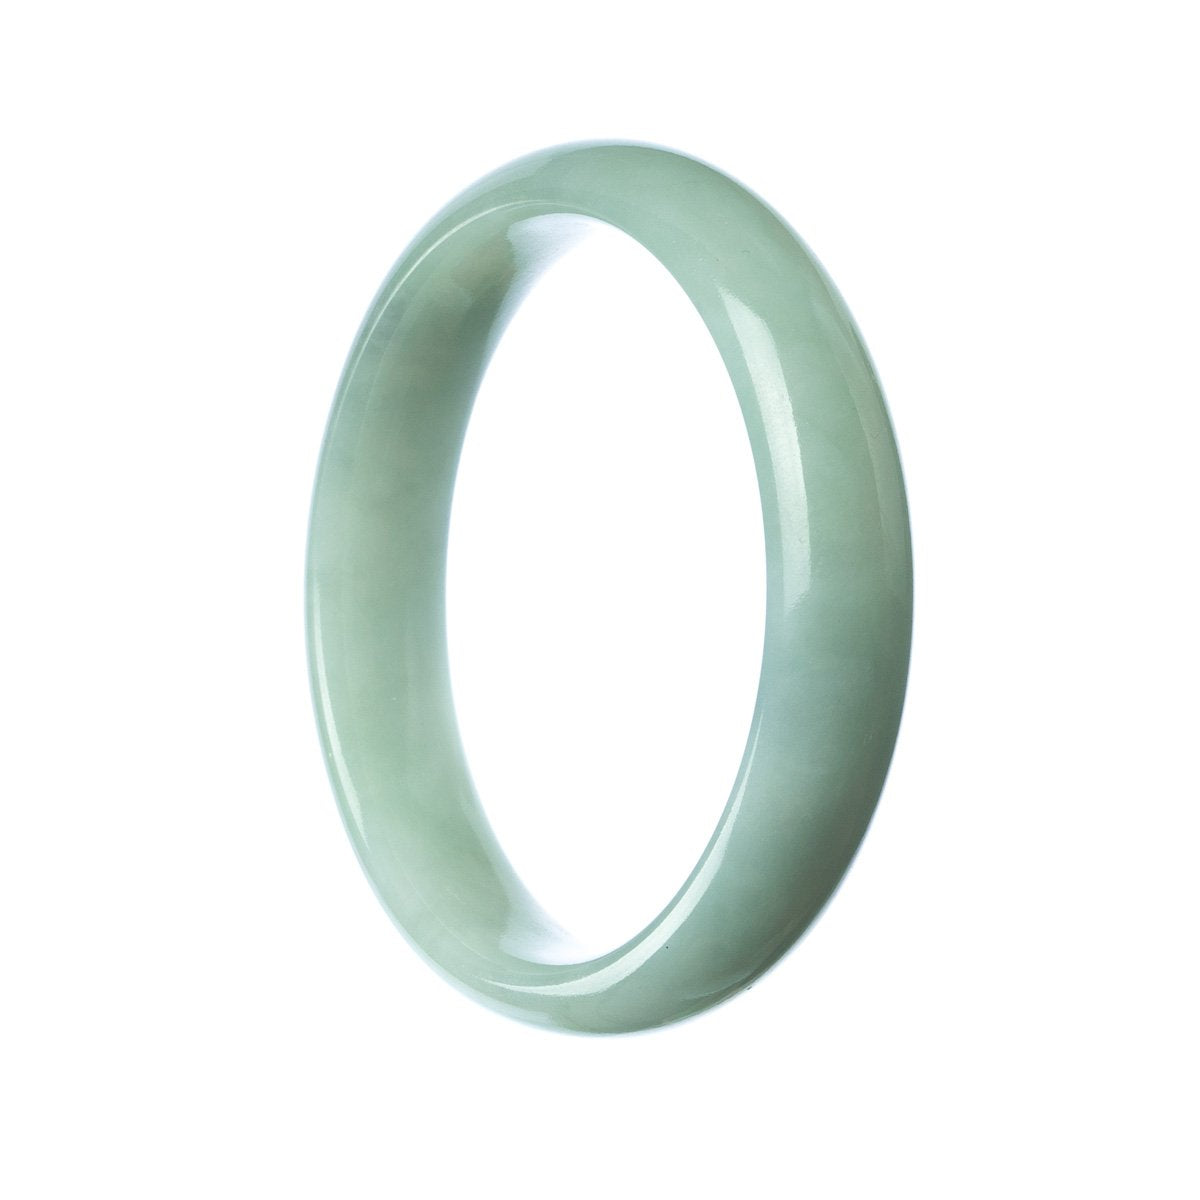 An authentic Type A pale green jadeite jade bangle with a 57mm half moon shape, available at MAYS GEMS.